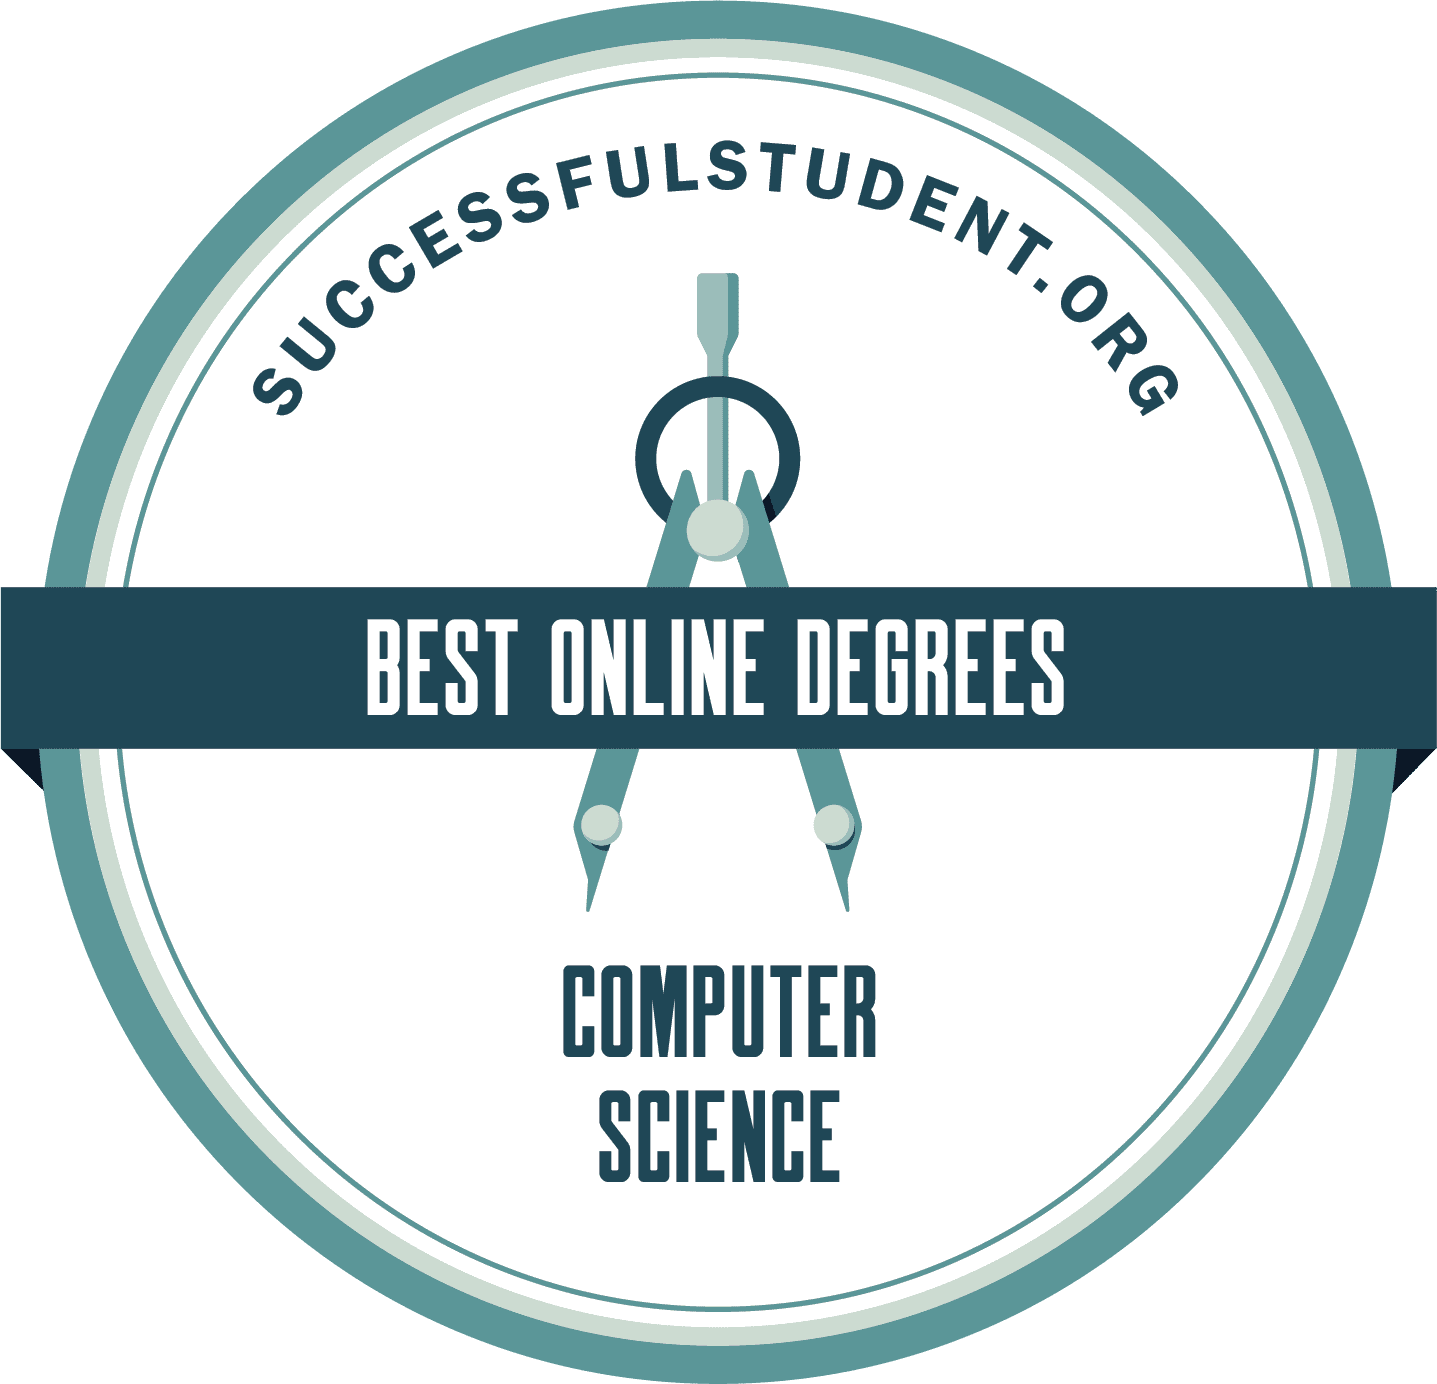 The Best Online Computer Science Programs: Bachelor’s Degrees's Badge